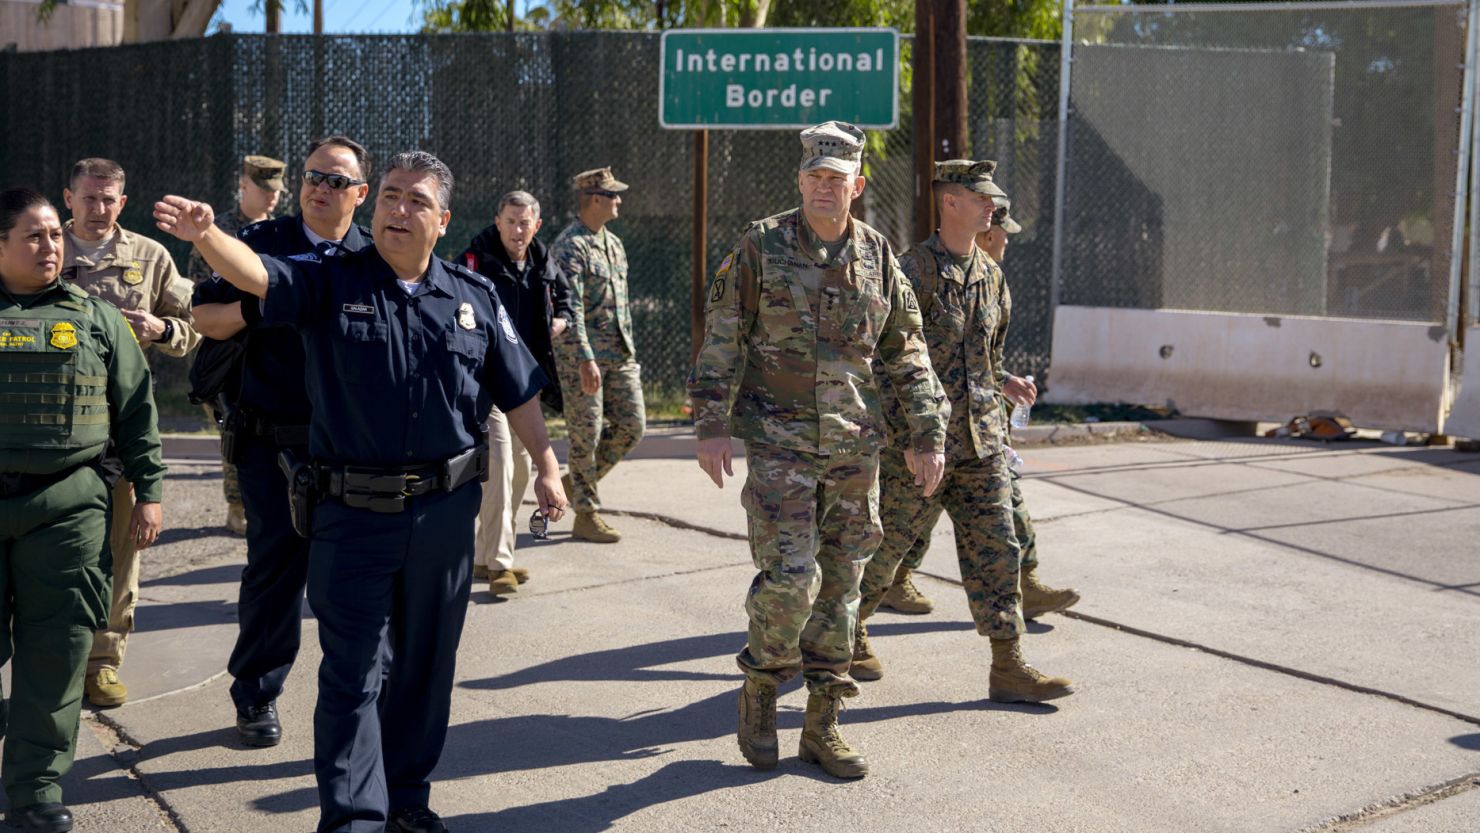 Calexico Port Director David Salazar guides US Army North Commander Lt. Gen. Jeffrey Buchanan on a tour of the Calexico West Port of Entry.  They are accompanied by Chief Patrol Agent of the US Border Patrol El Centro Sector Gloria Chavez and San Diego Director of Field Operations Pete Flores. November 13, 2018.  Photo by Ralph Desio.